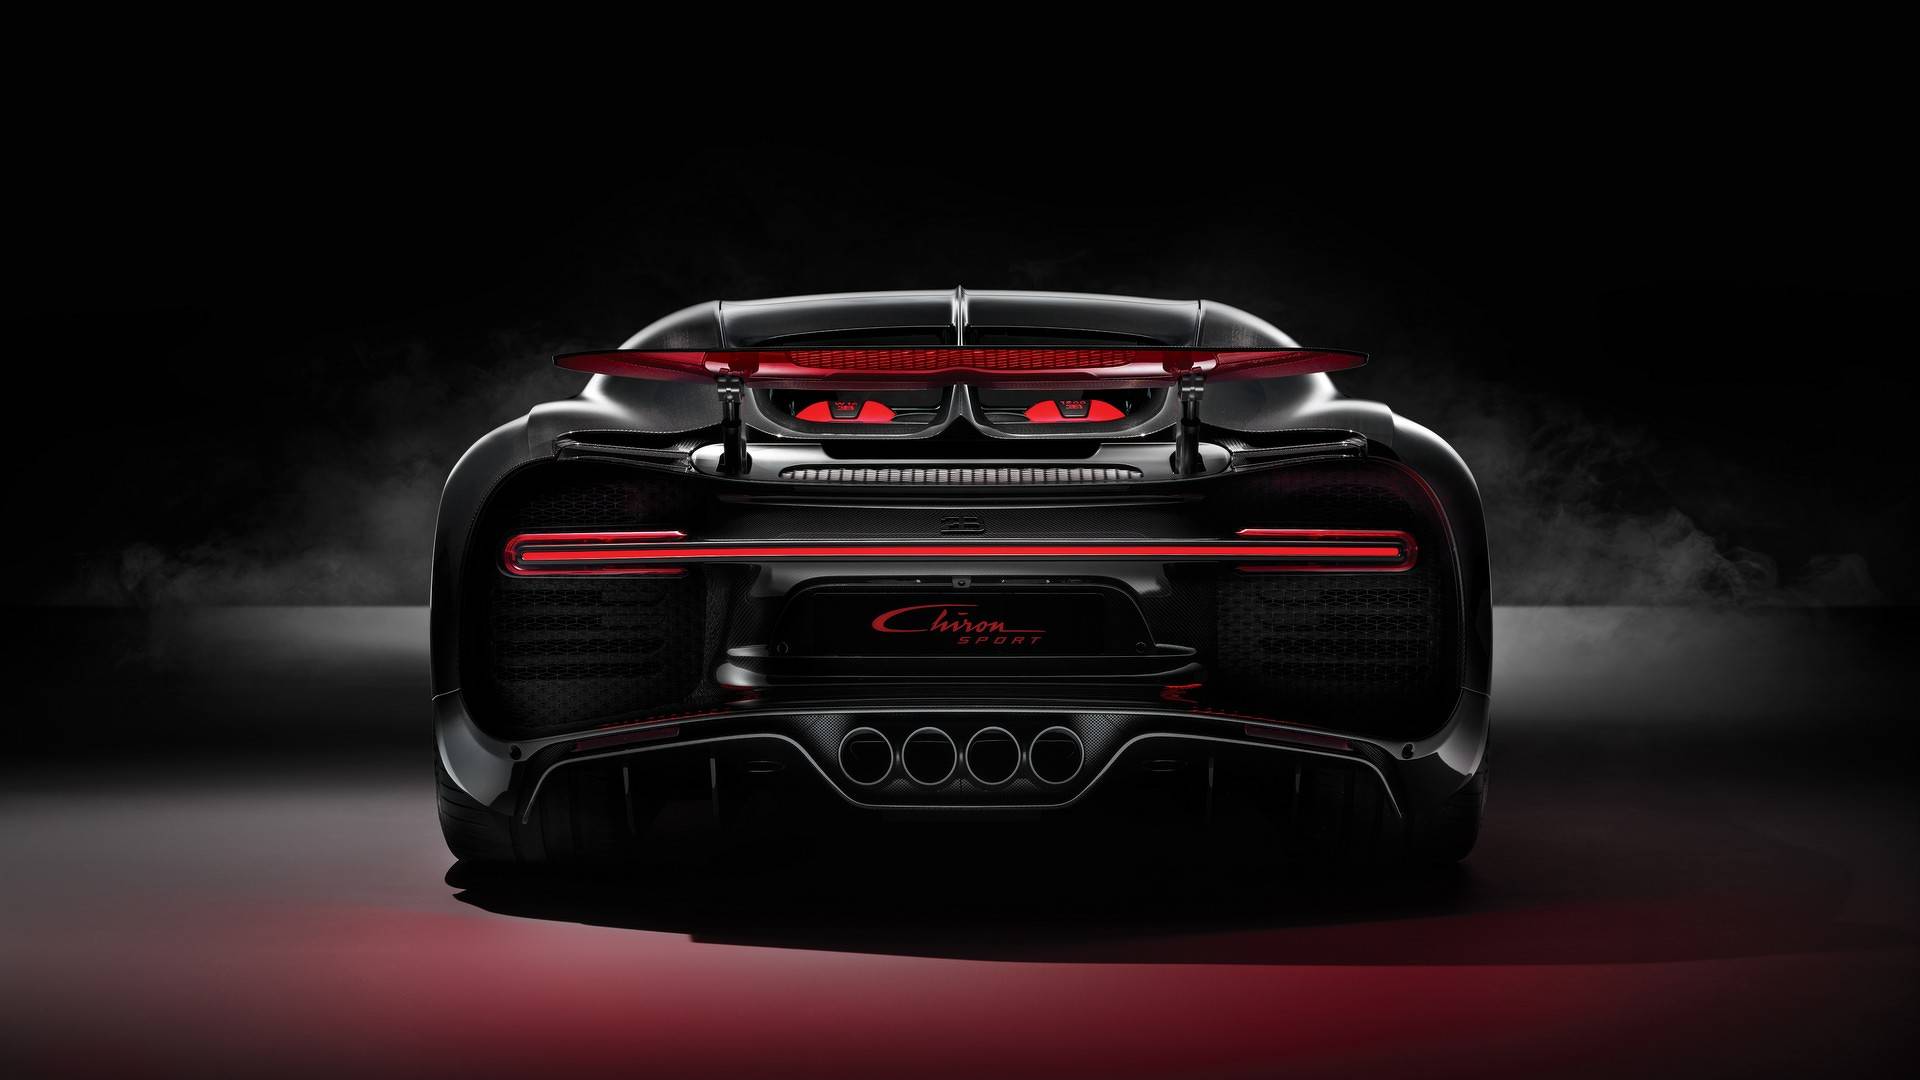 FormaCar: Rumor: Bugatti Chiron Divo has less HP at 2x the price